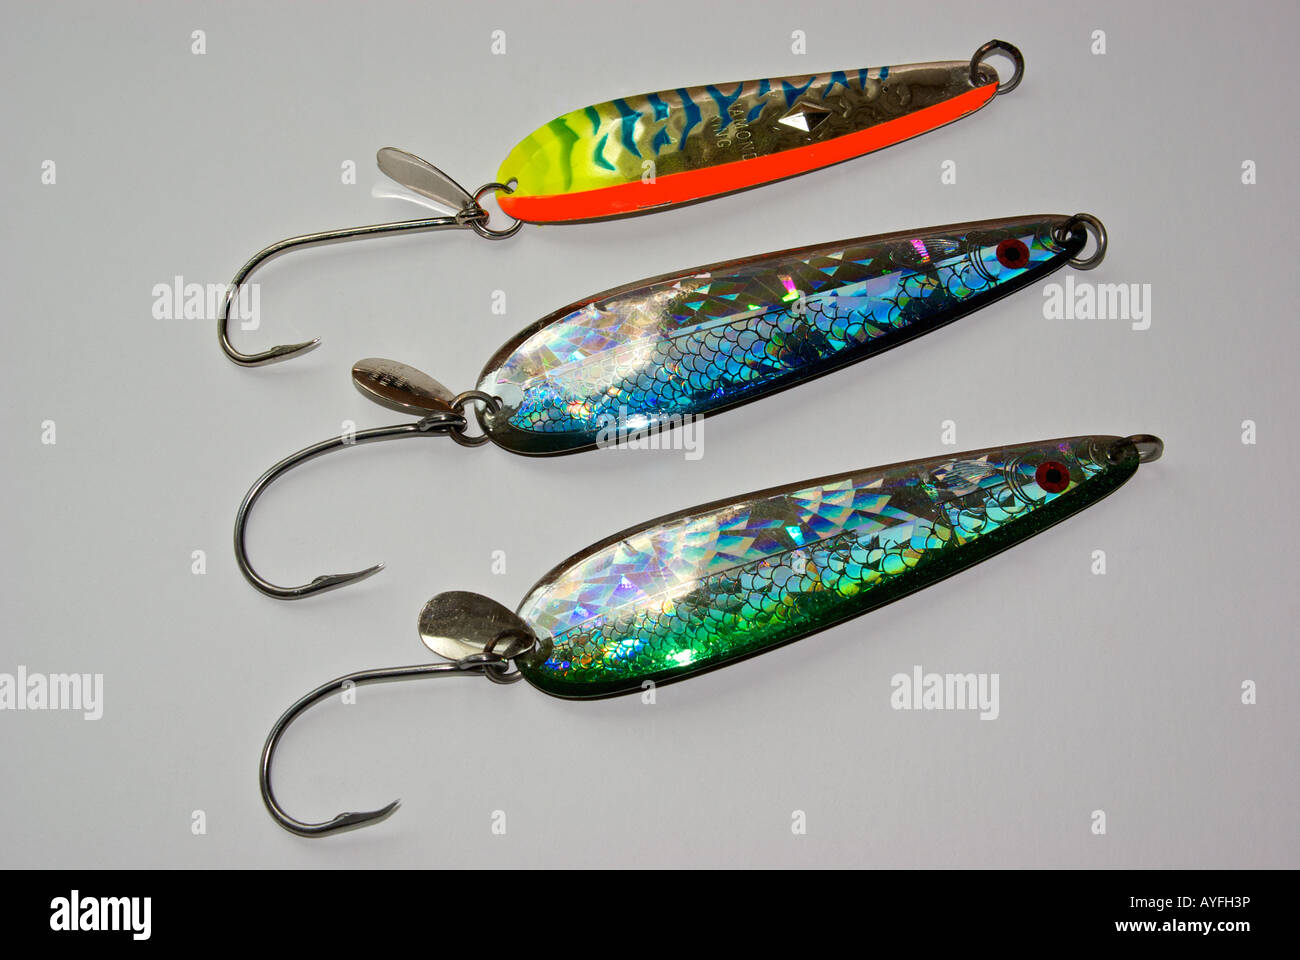 Luhr Jensen Diamond King and Coyote trolling spoons for salmon Stock Photo  - Alamy